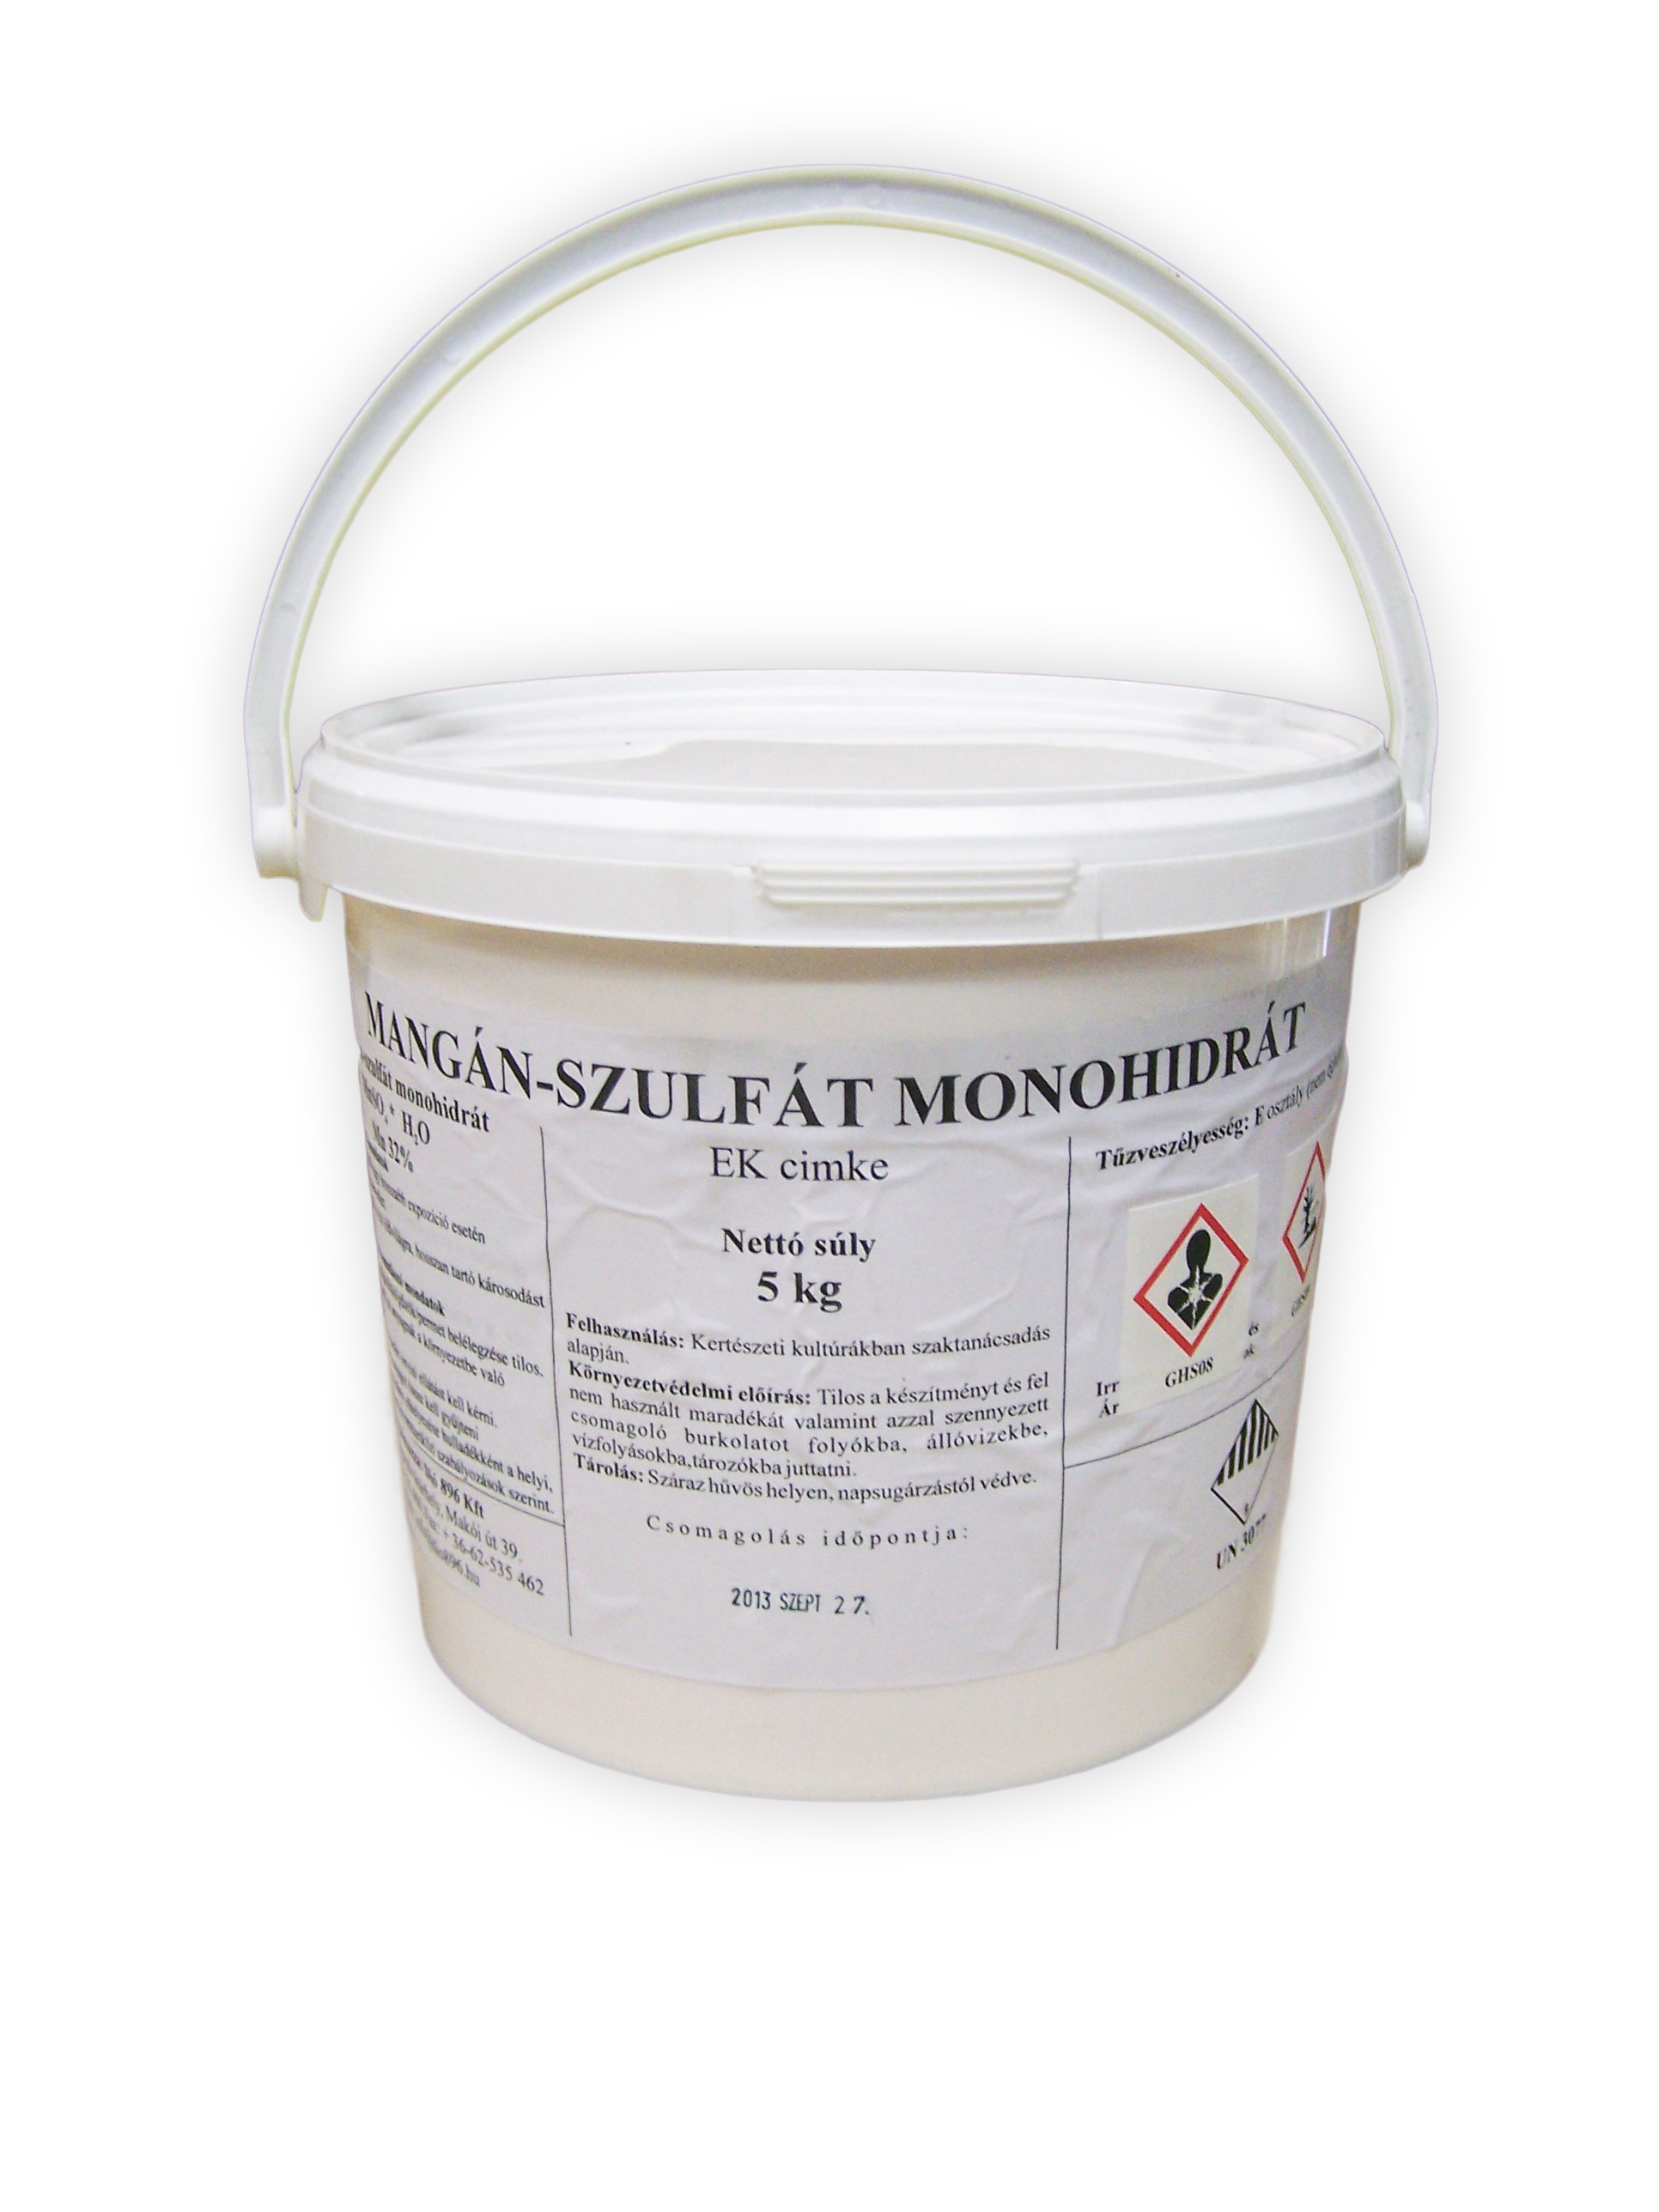 Manganese sulphate (Mn 32%) 5kg